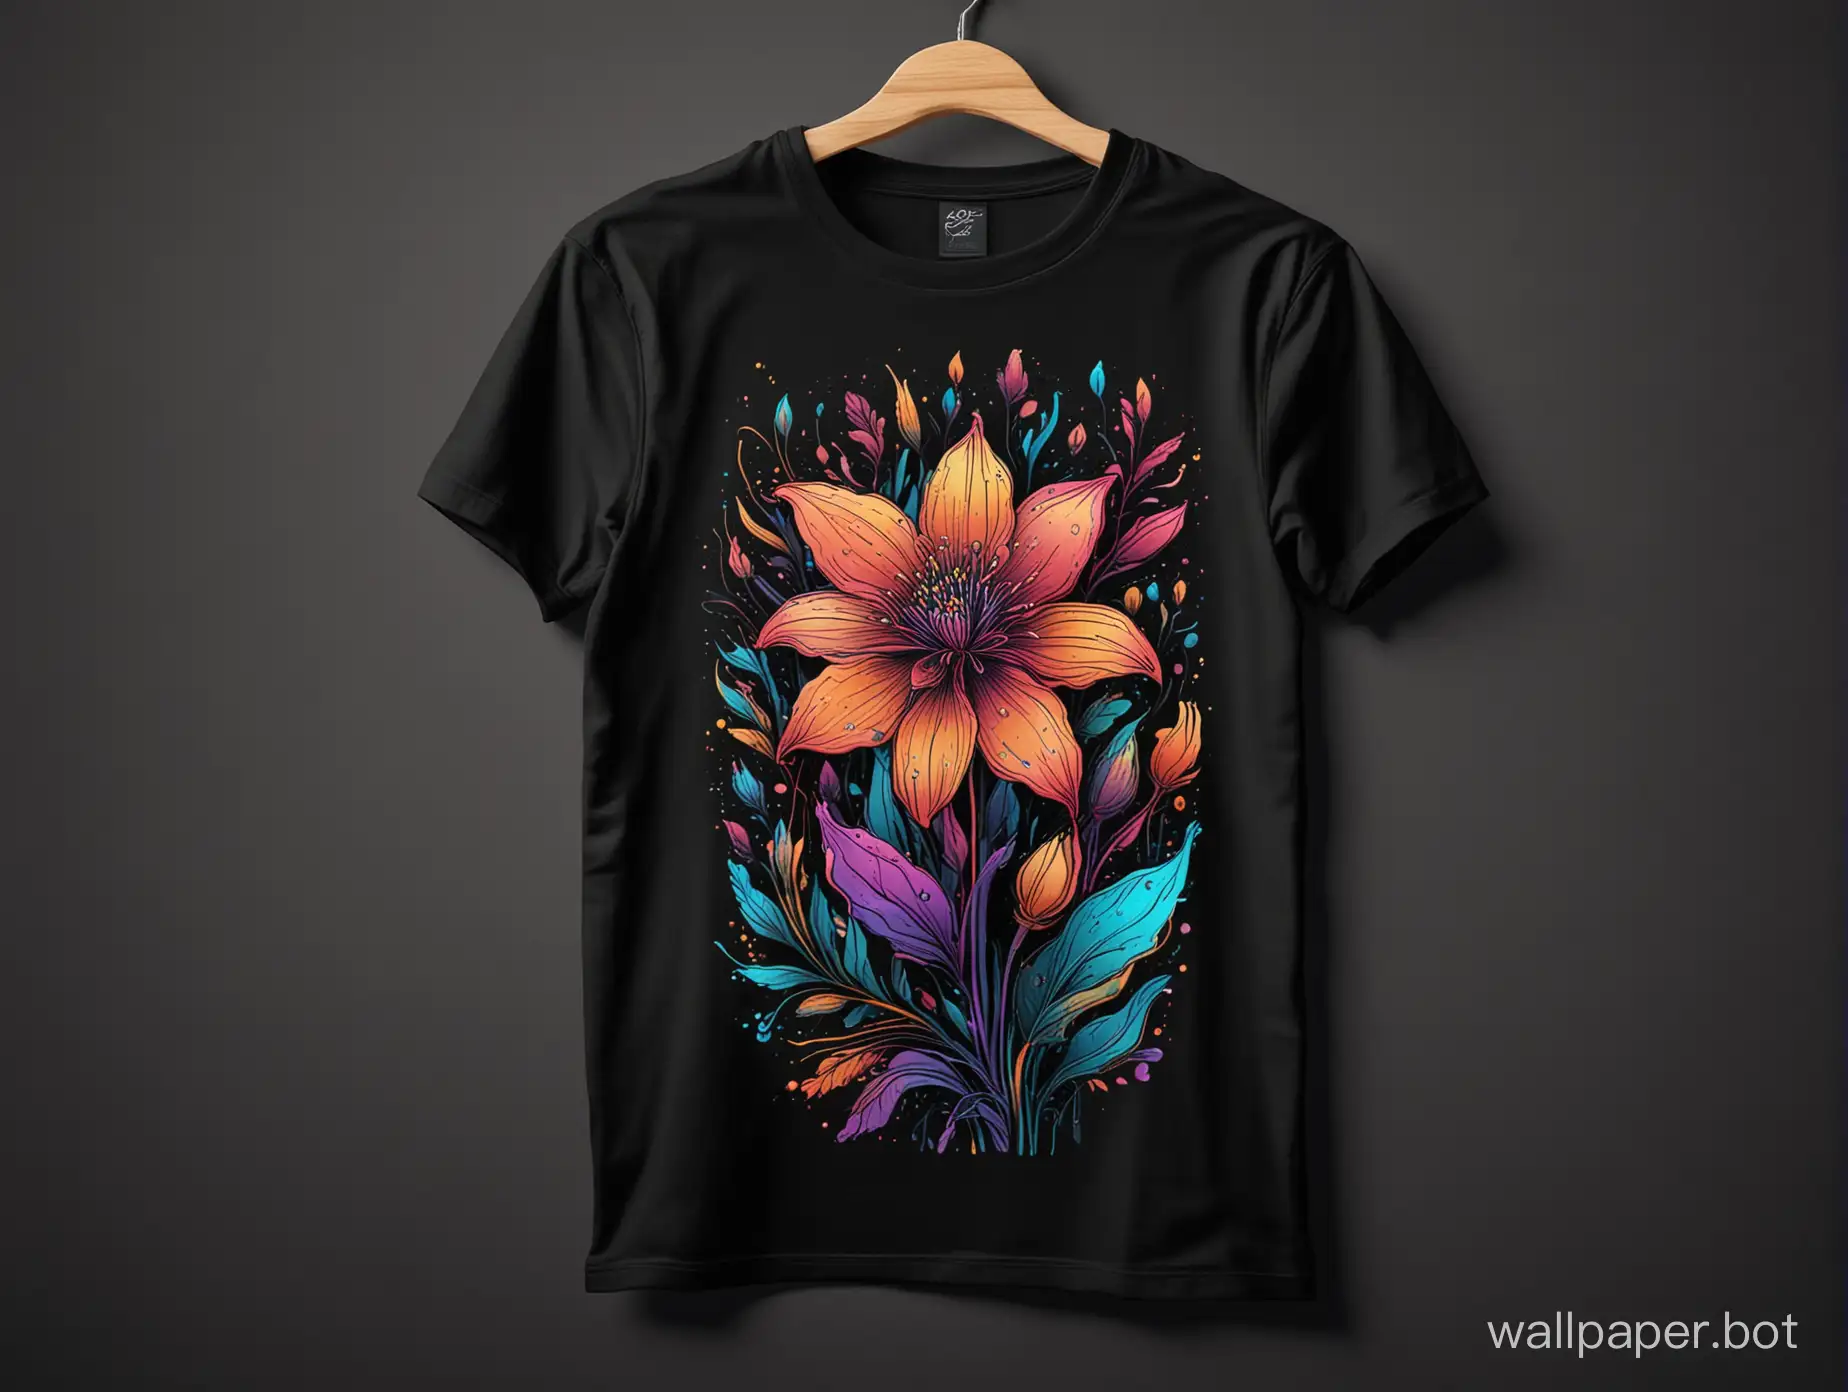 black t shirt mockup template, shirt, botanical art style, colorful abstract neon flower, fluid lineart illustration on shirt, constrast lineart, explosive colors